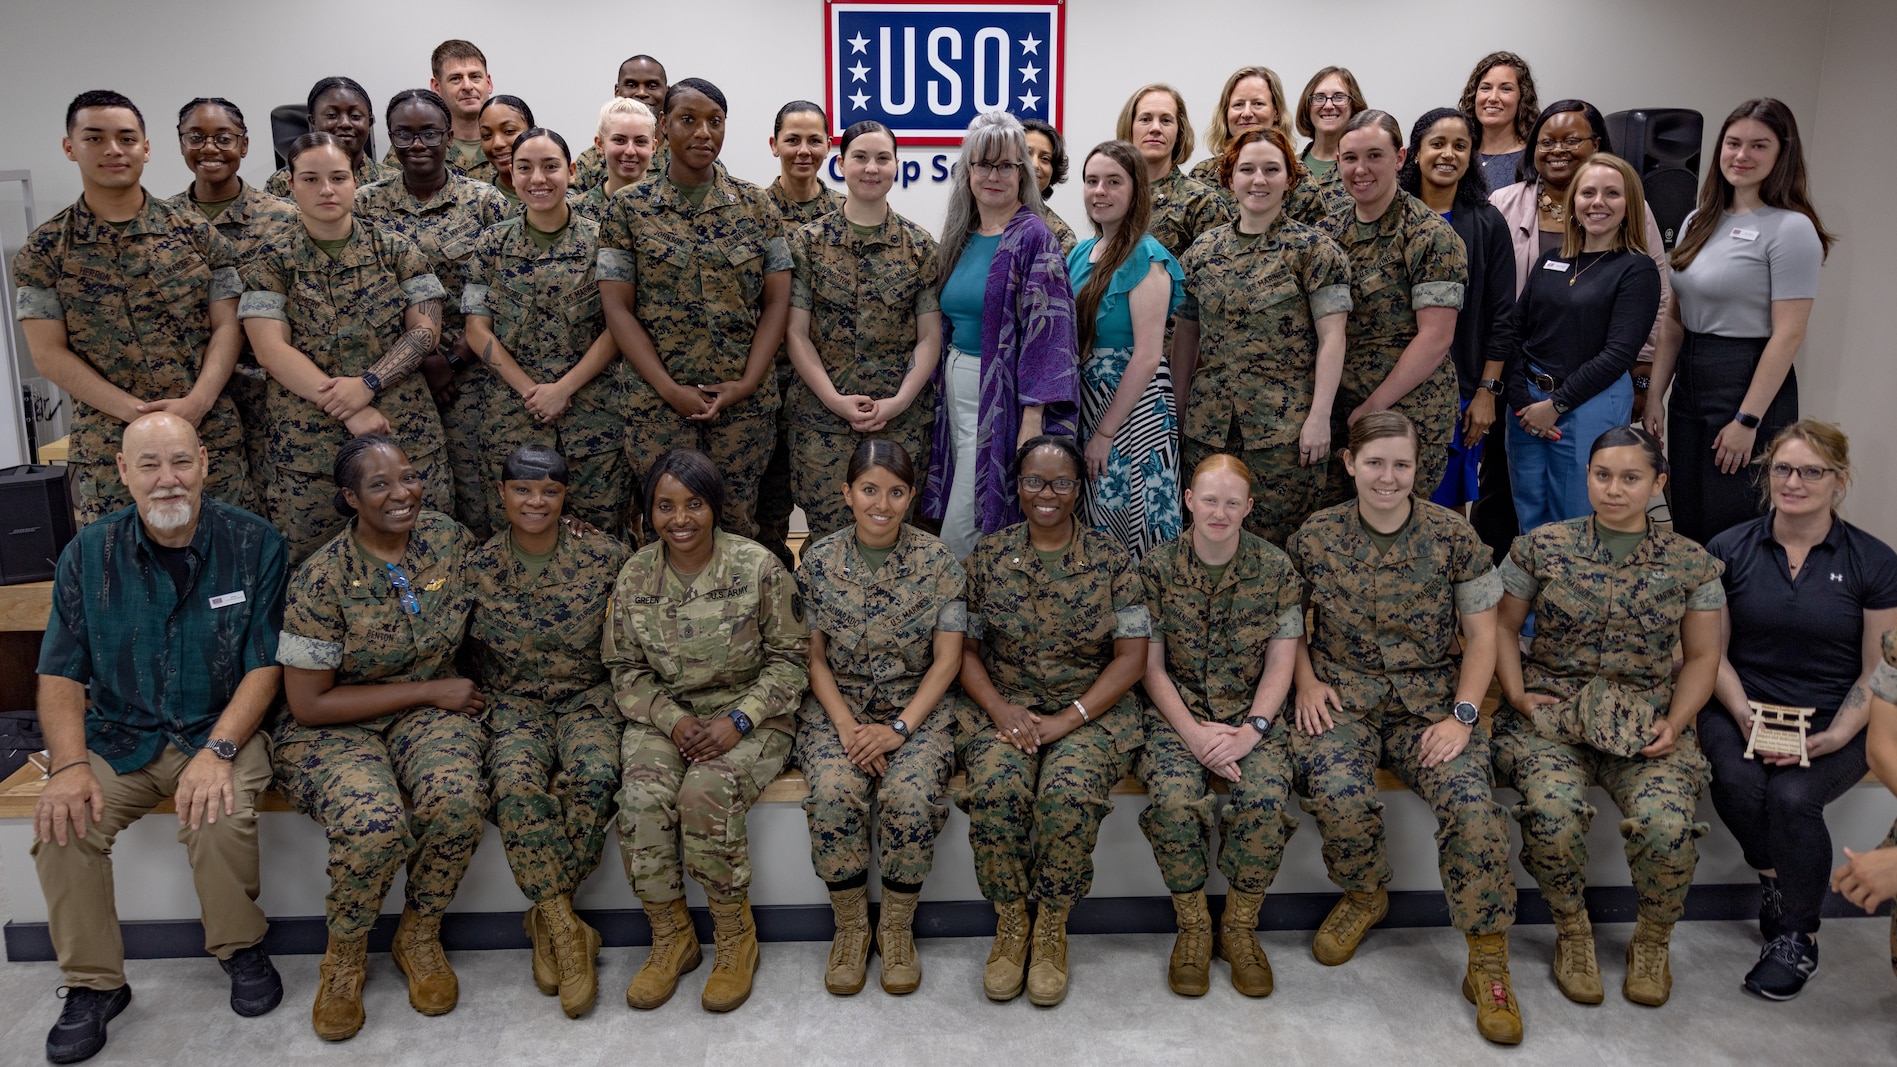 Members of the Women’s Leadership and Education Forum pose for a group picture following the WLEF’s 1-year anniversary meeting on Camp Schwab, Okinawa, Japan, May 18, 2023. WLEF celebrated its milestone with guest speakers and a guided discussion theme-focused on work-life balance as leaders. WLEF was developed to create a healthy environment for hard discussions, addressing cultural improvements, cohesion and leadership by providing opportunities for networking, support, mentorship, and career development for U.S. Marines and Sailors on Okinawa. (U.S. Marine Corps photo by Cpl. Tyler Andrews)